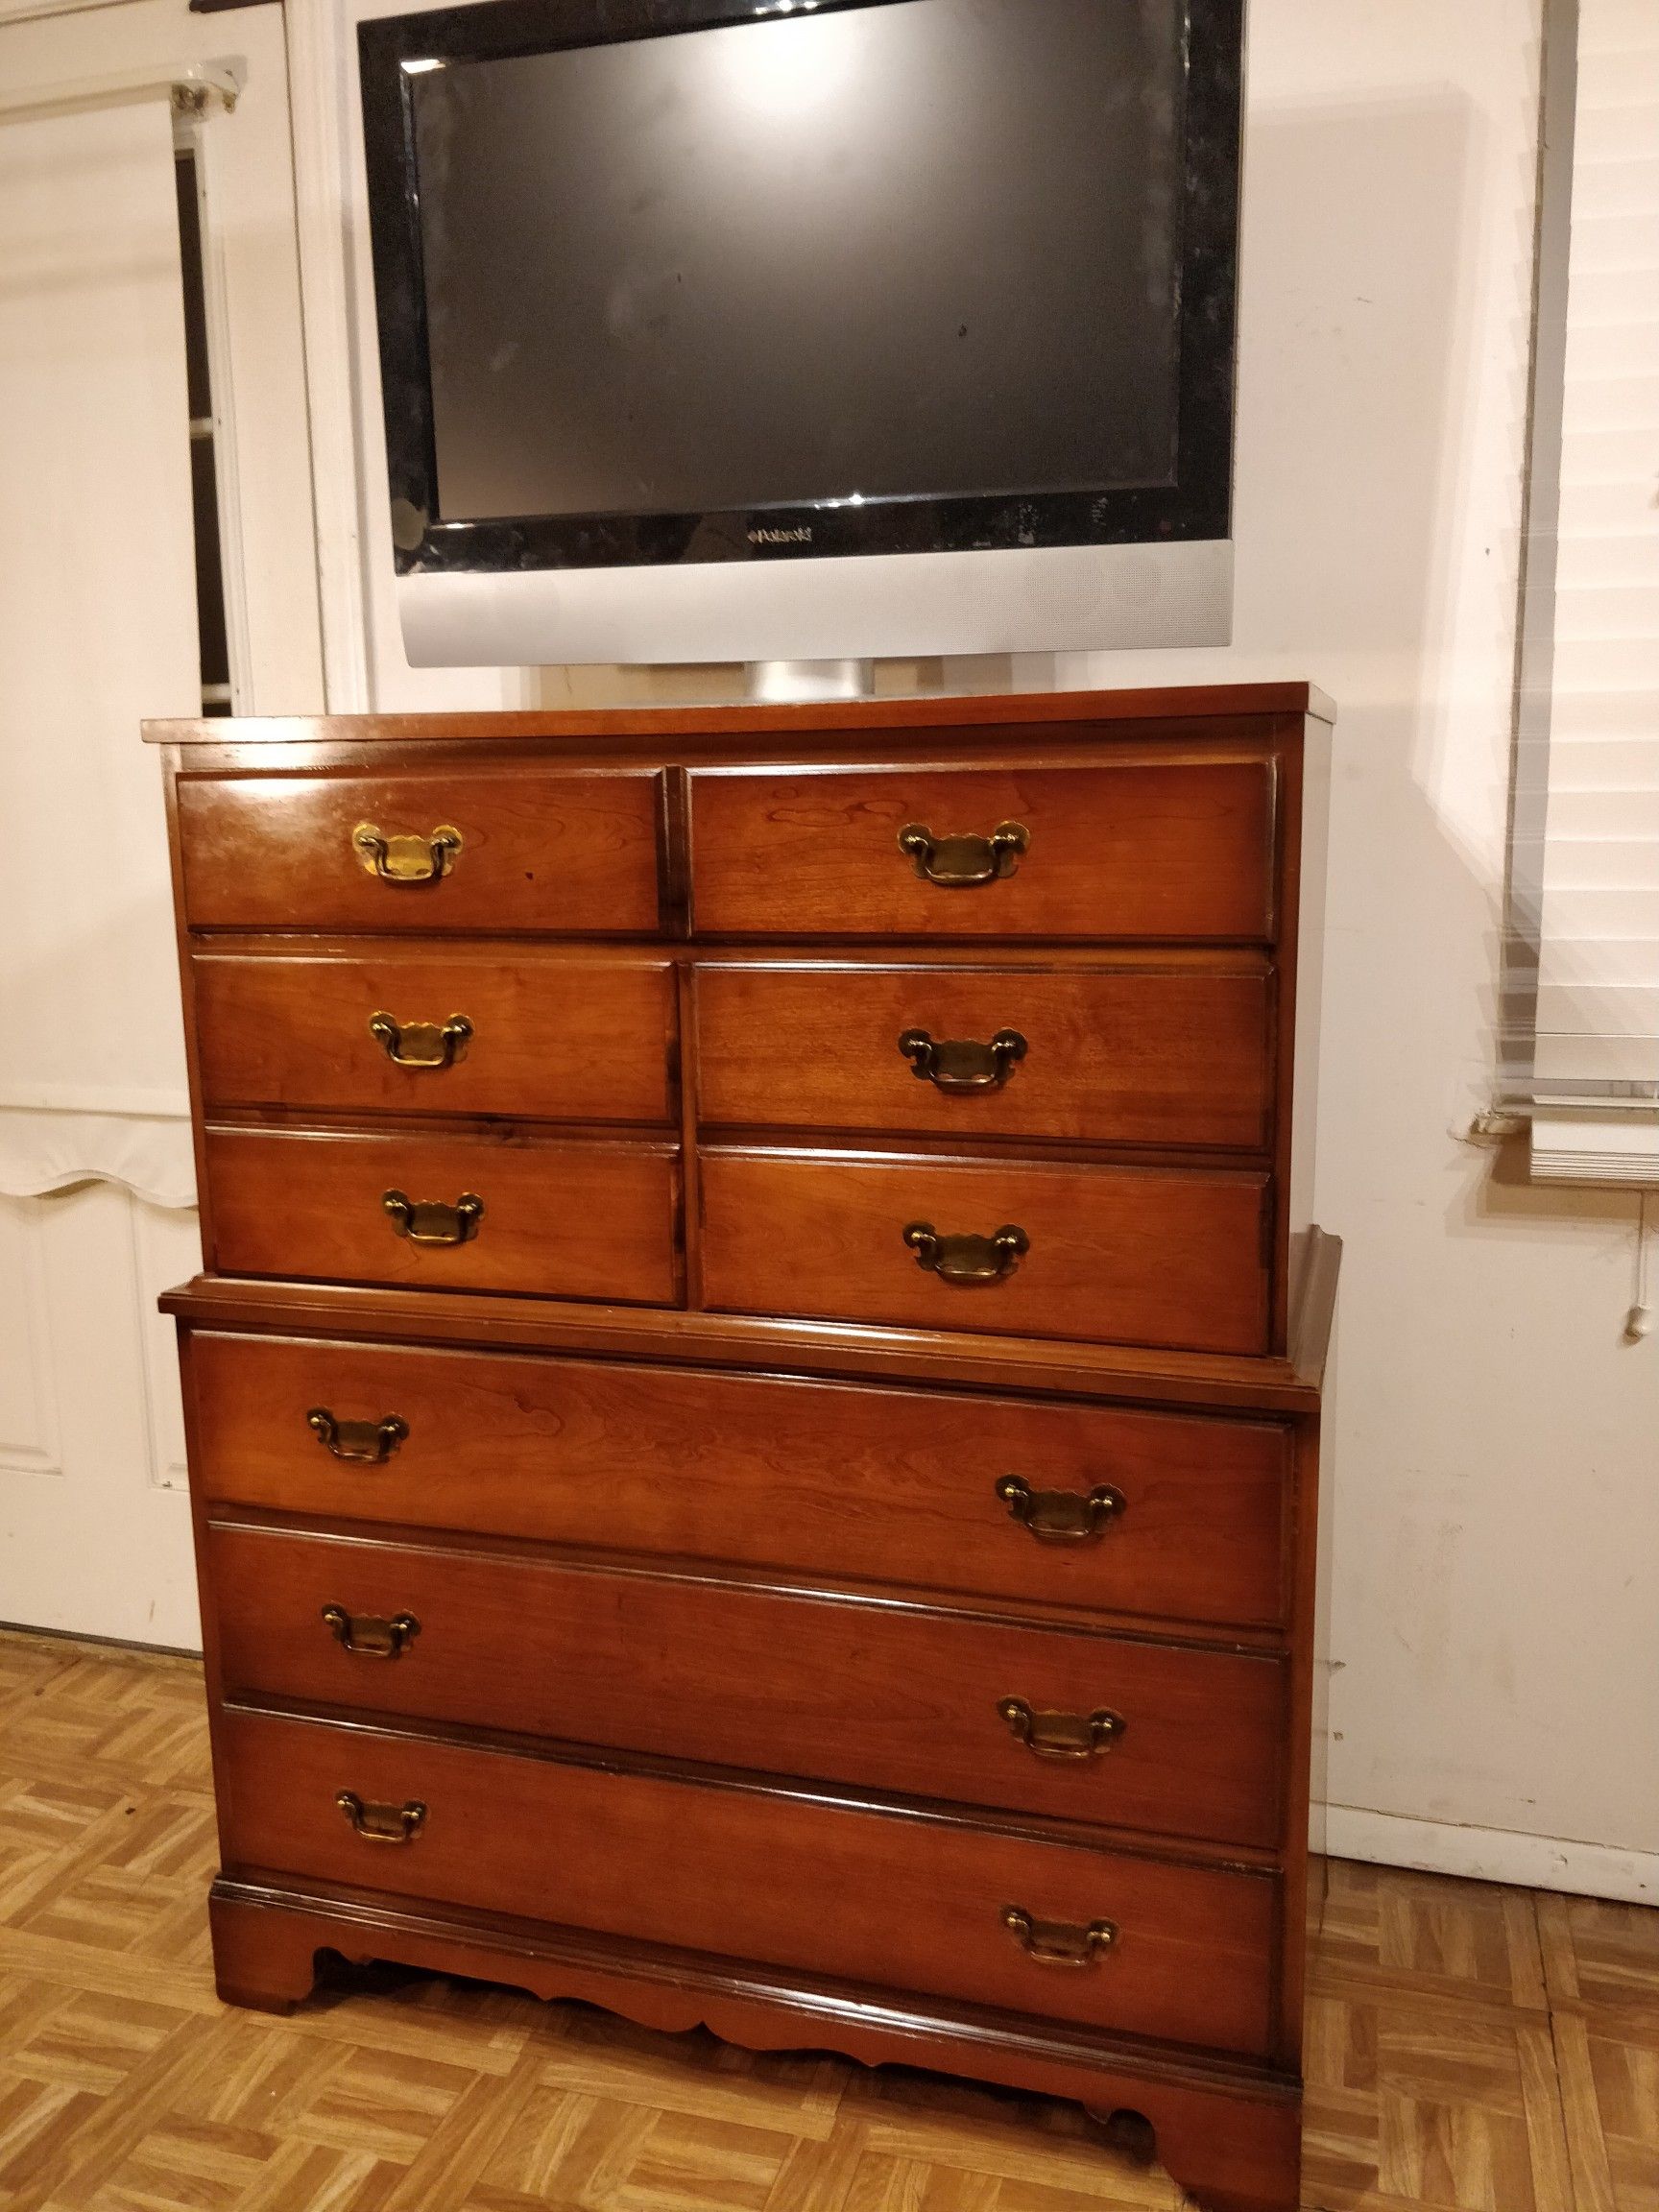 Nice solid wood DIXIE chest dresser with big drawers in great condition, all drawers sliding smoothly. L40"*W18"*H48"